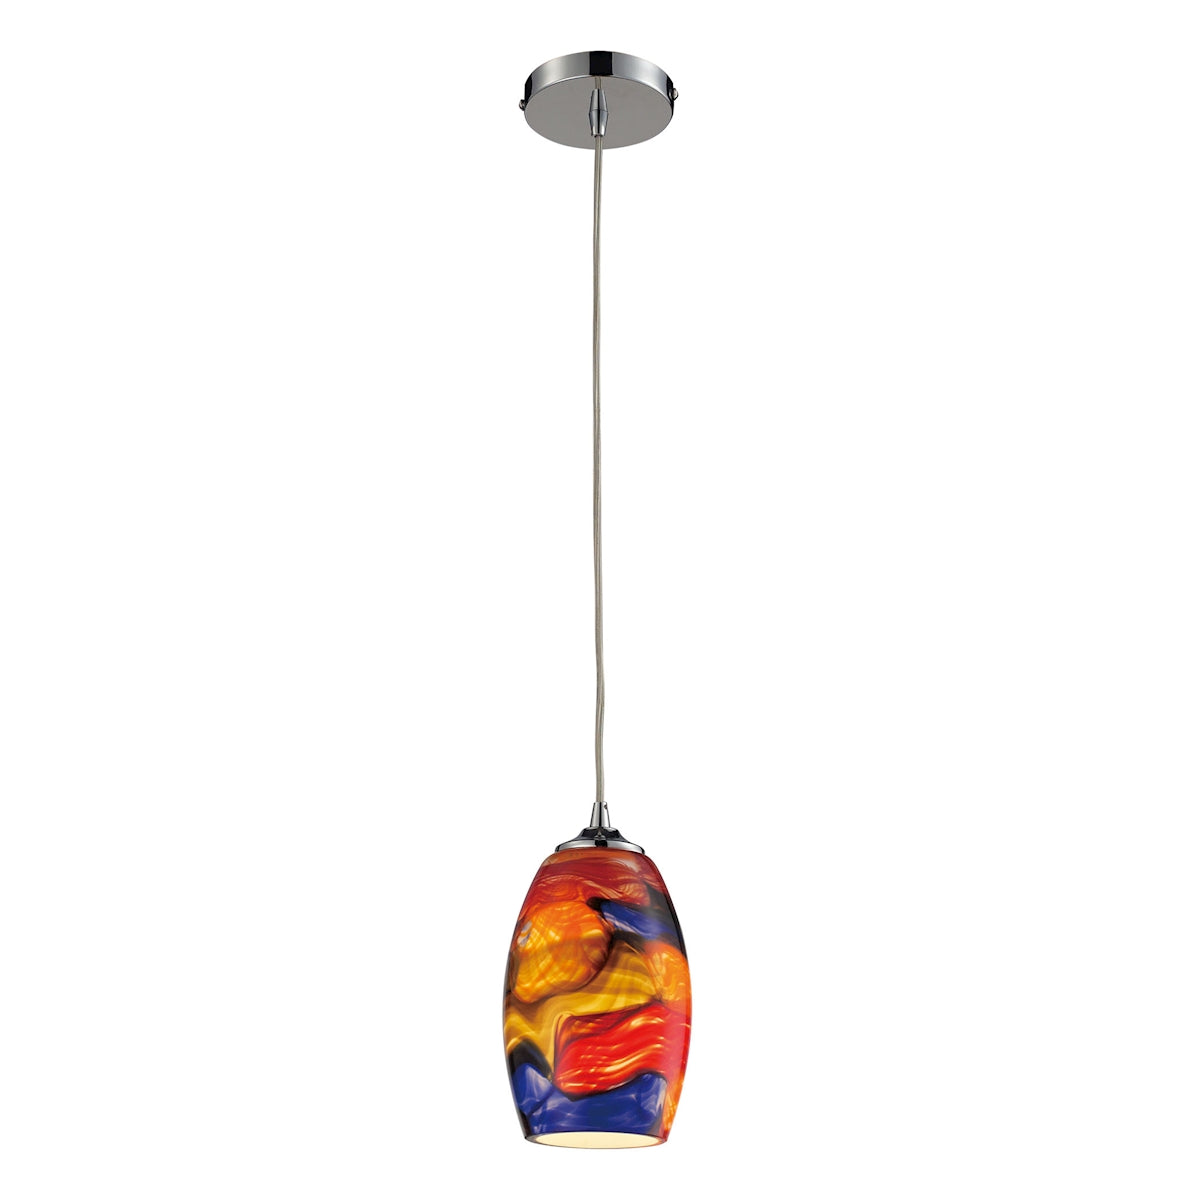 ELK Lighting 31339/1 Surrealist 1-Light Mini Pendant in Polished Chrome with Multi-colored Glass